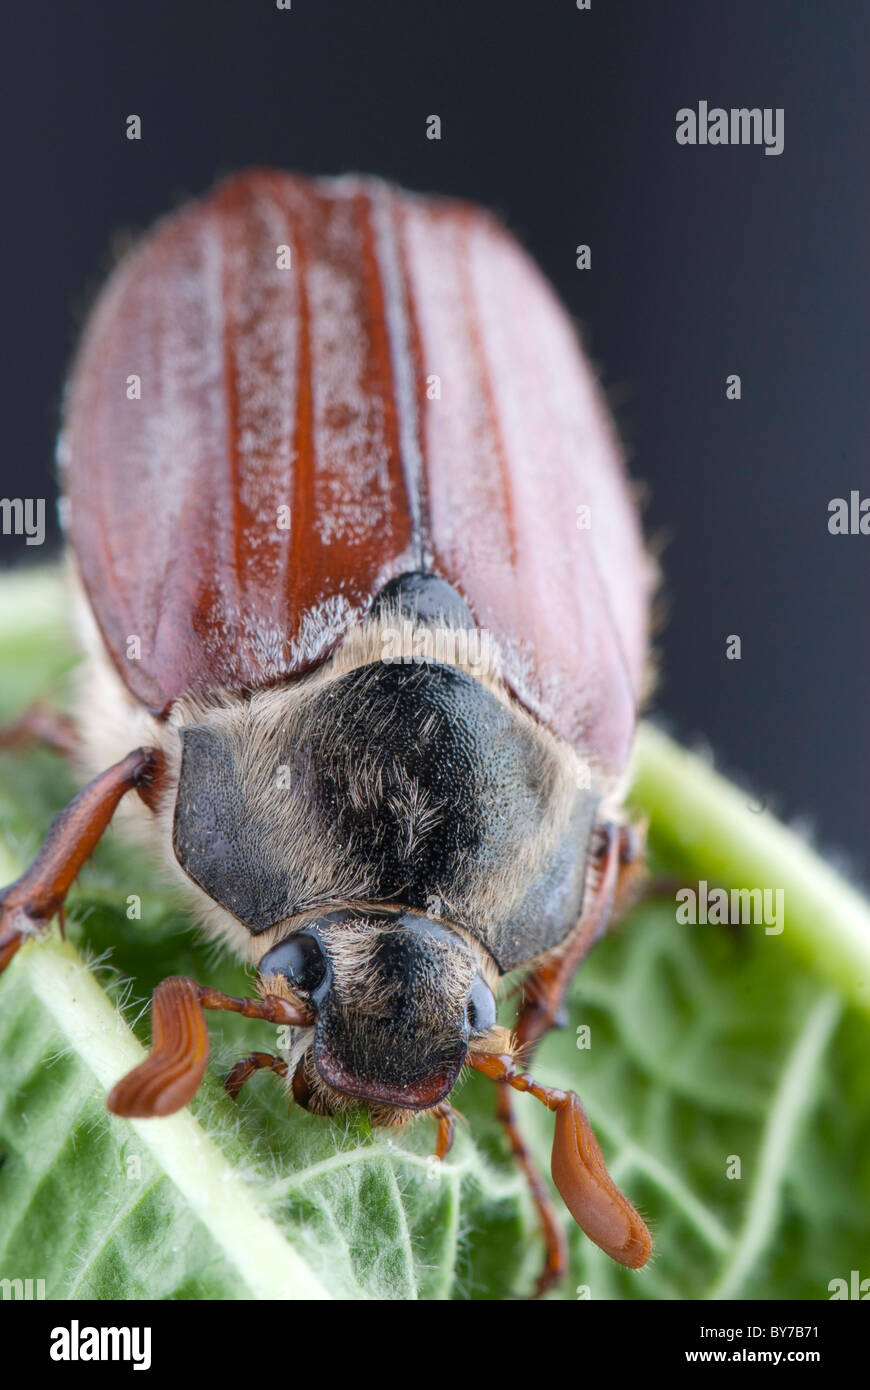 Adult Cockchafer Stock Photo